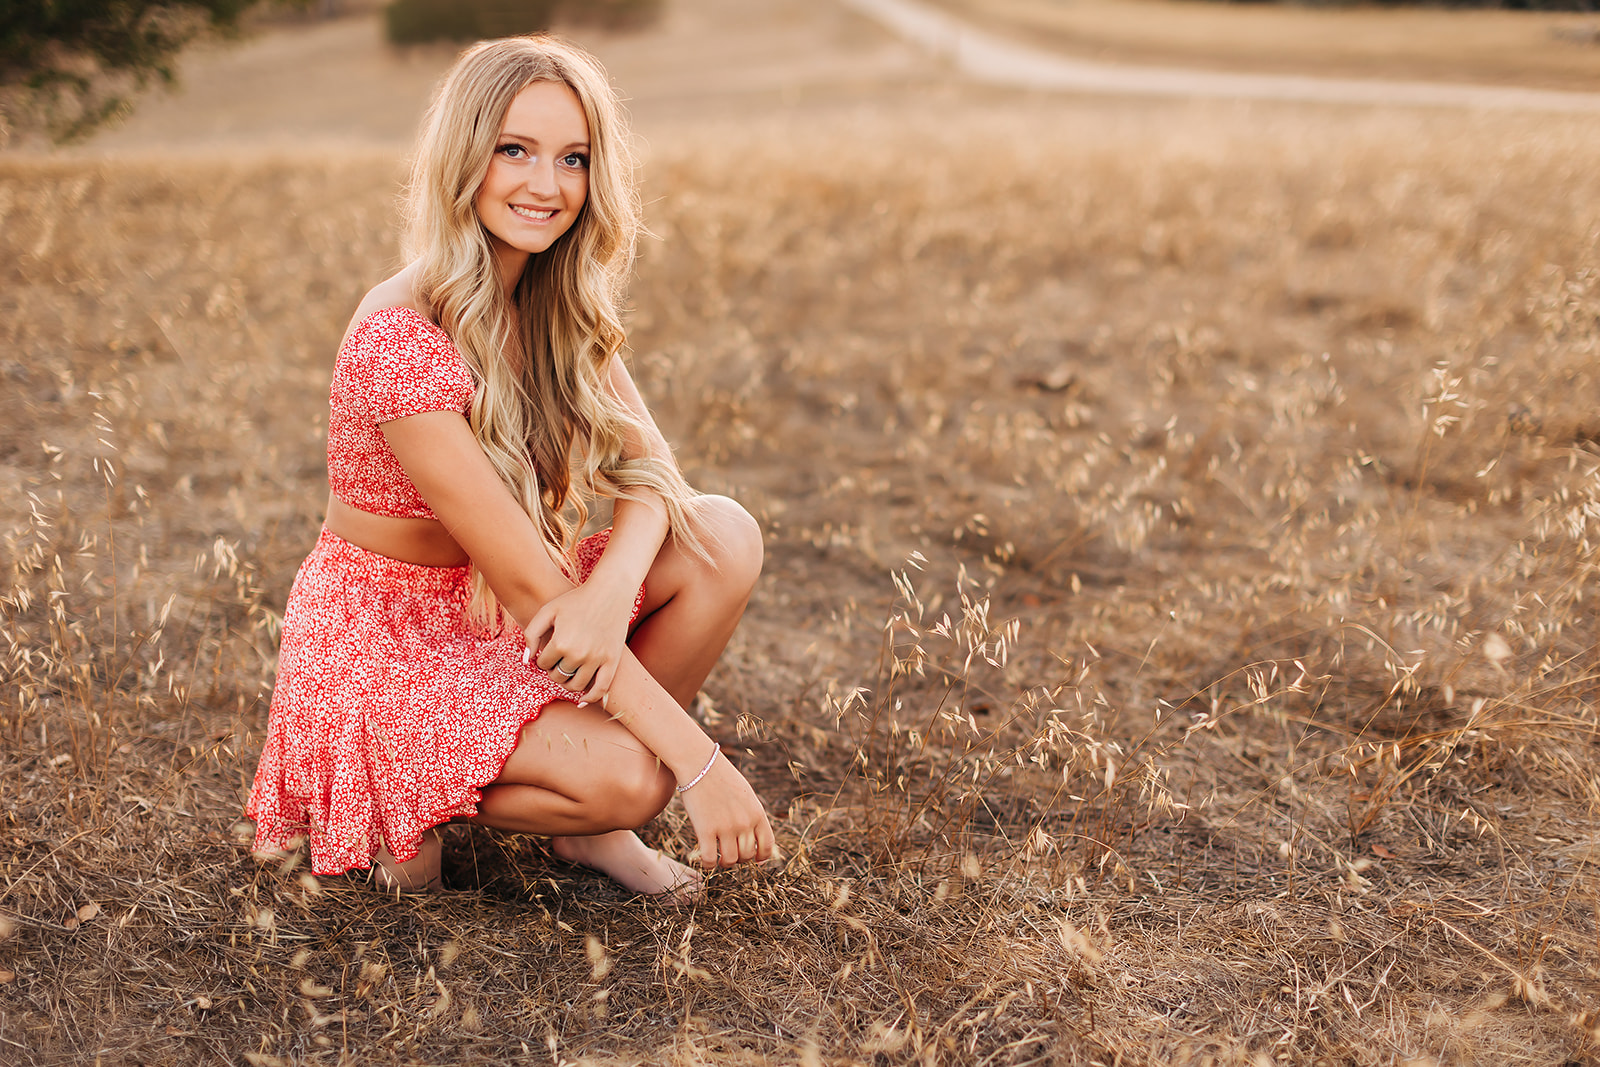 Choose Two Senior Picture Locations For Your Senior Photos